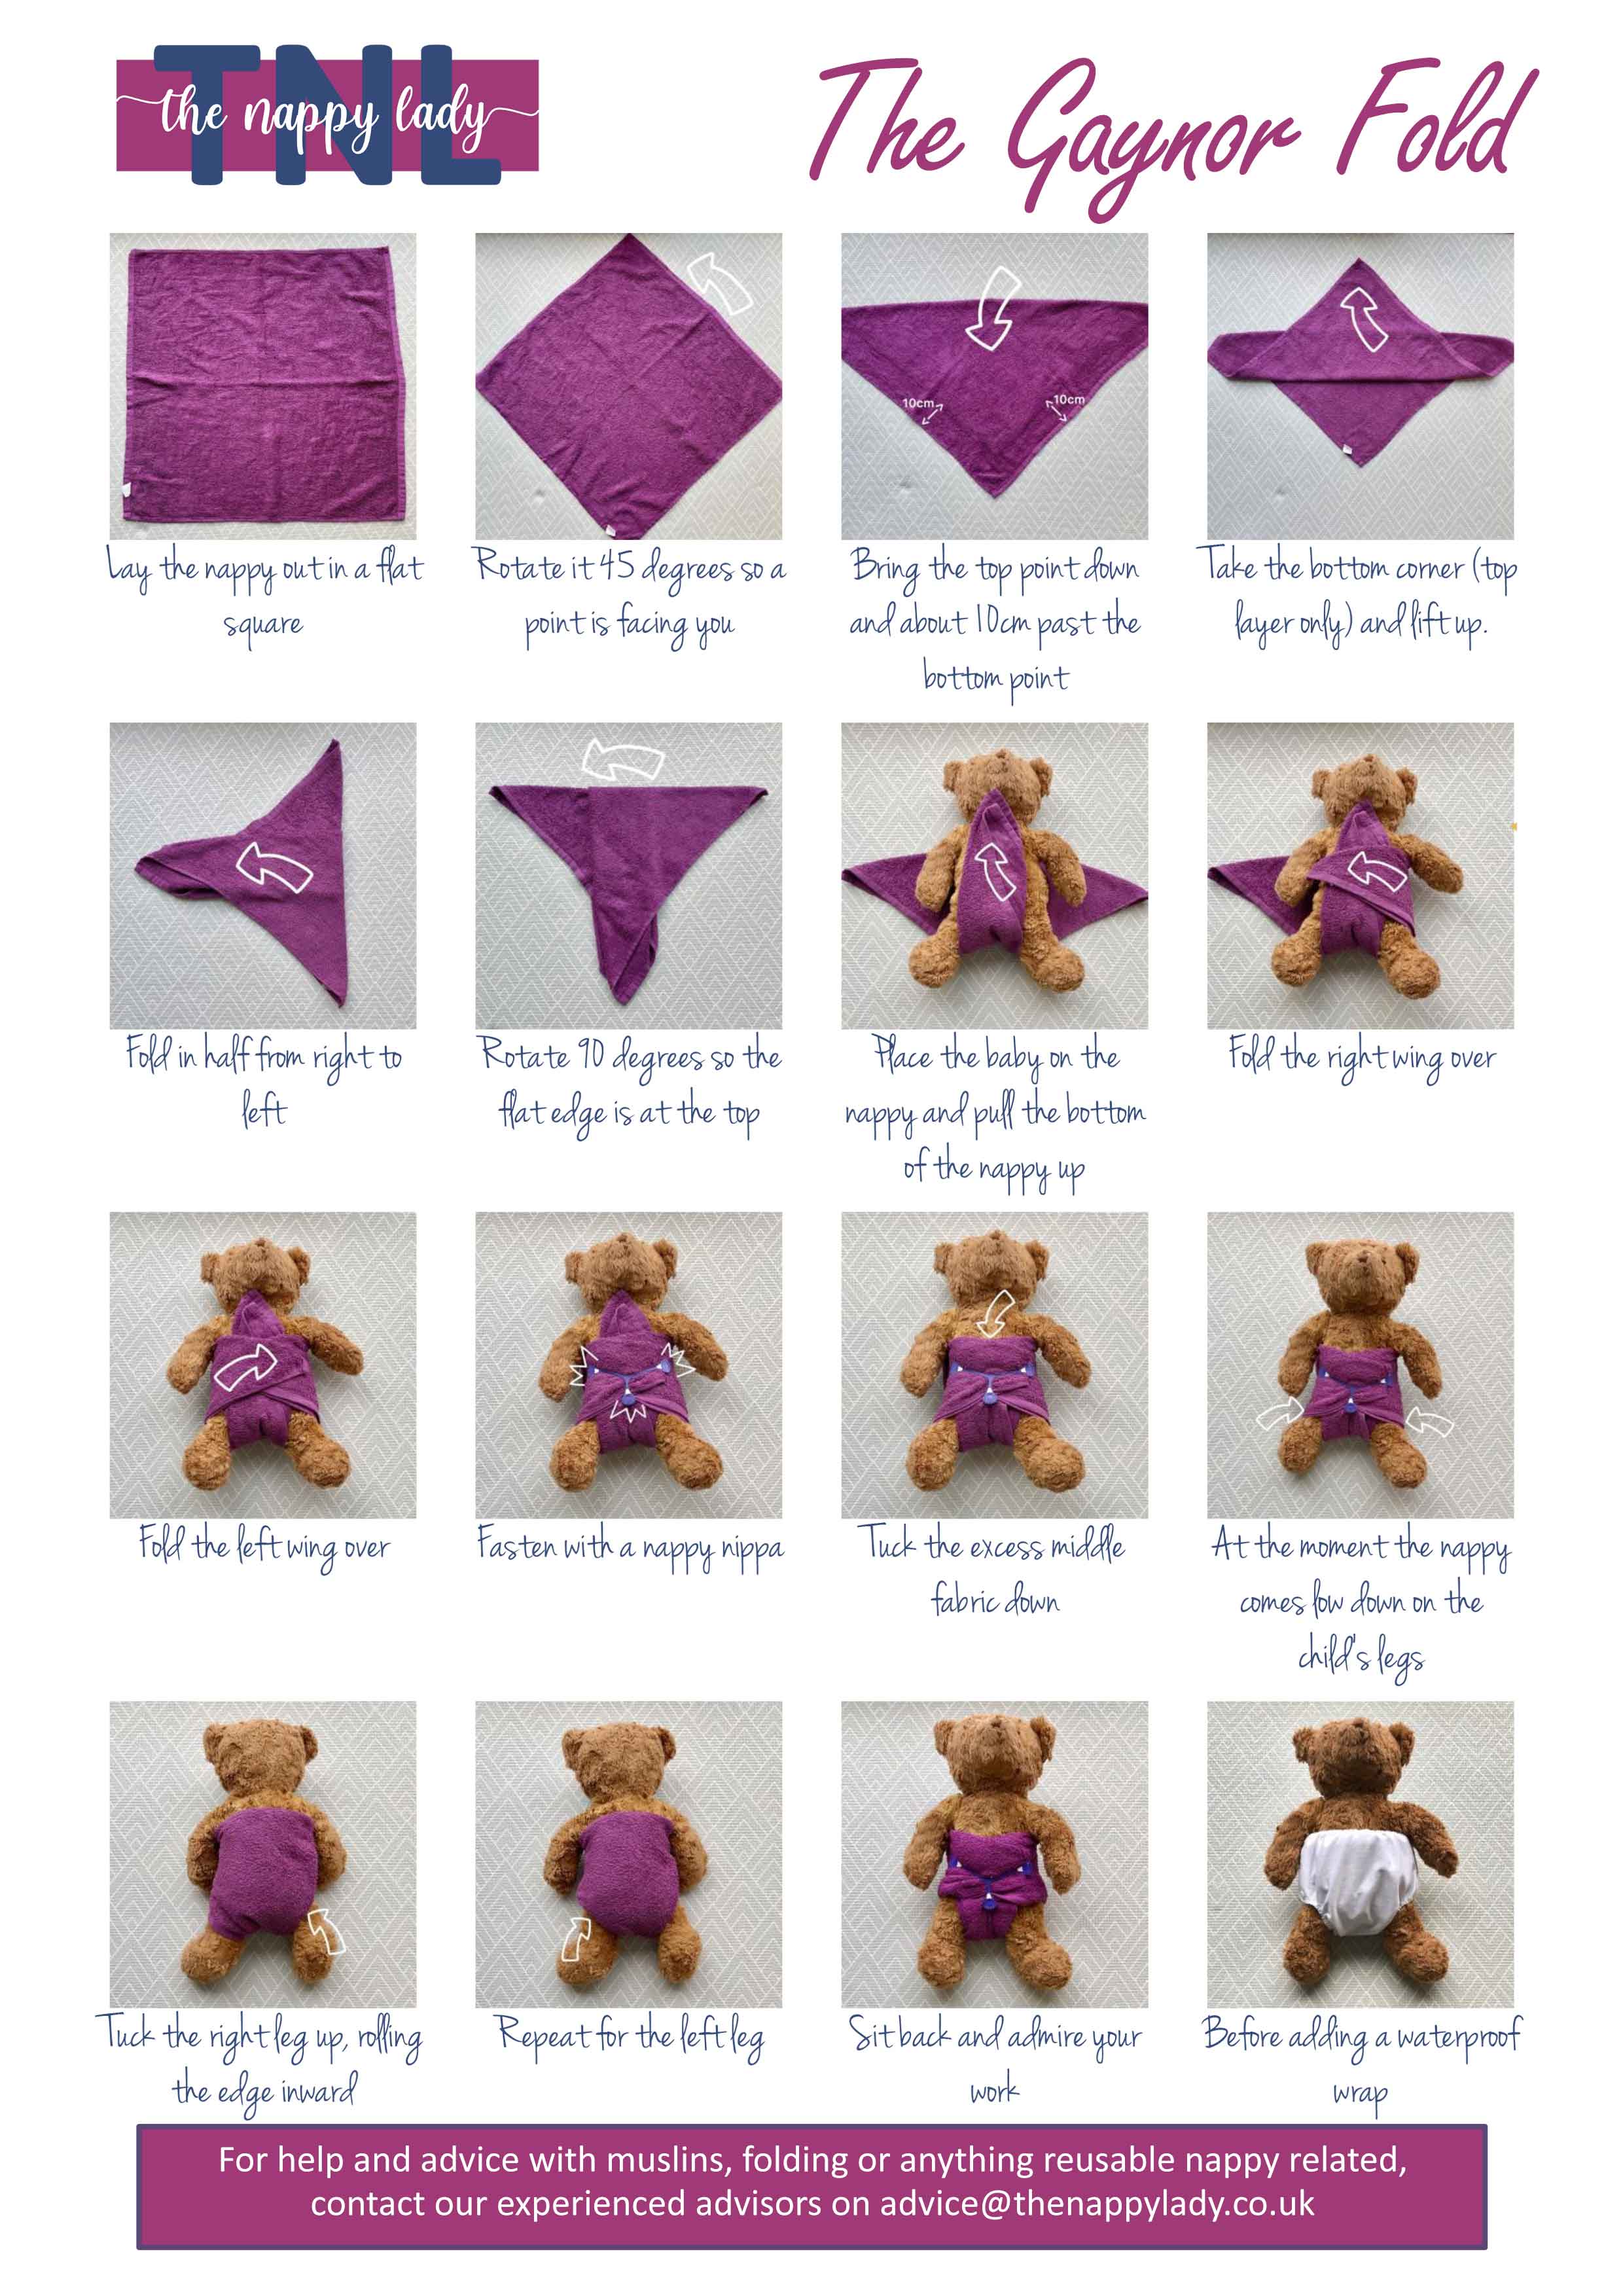 photo diagram of the gaynor fold for terry squares